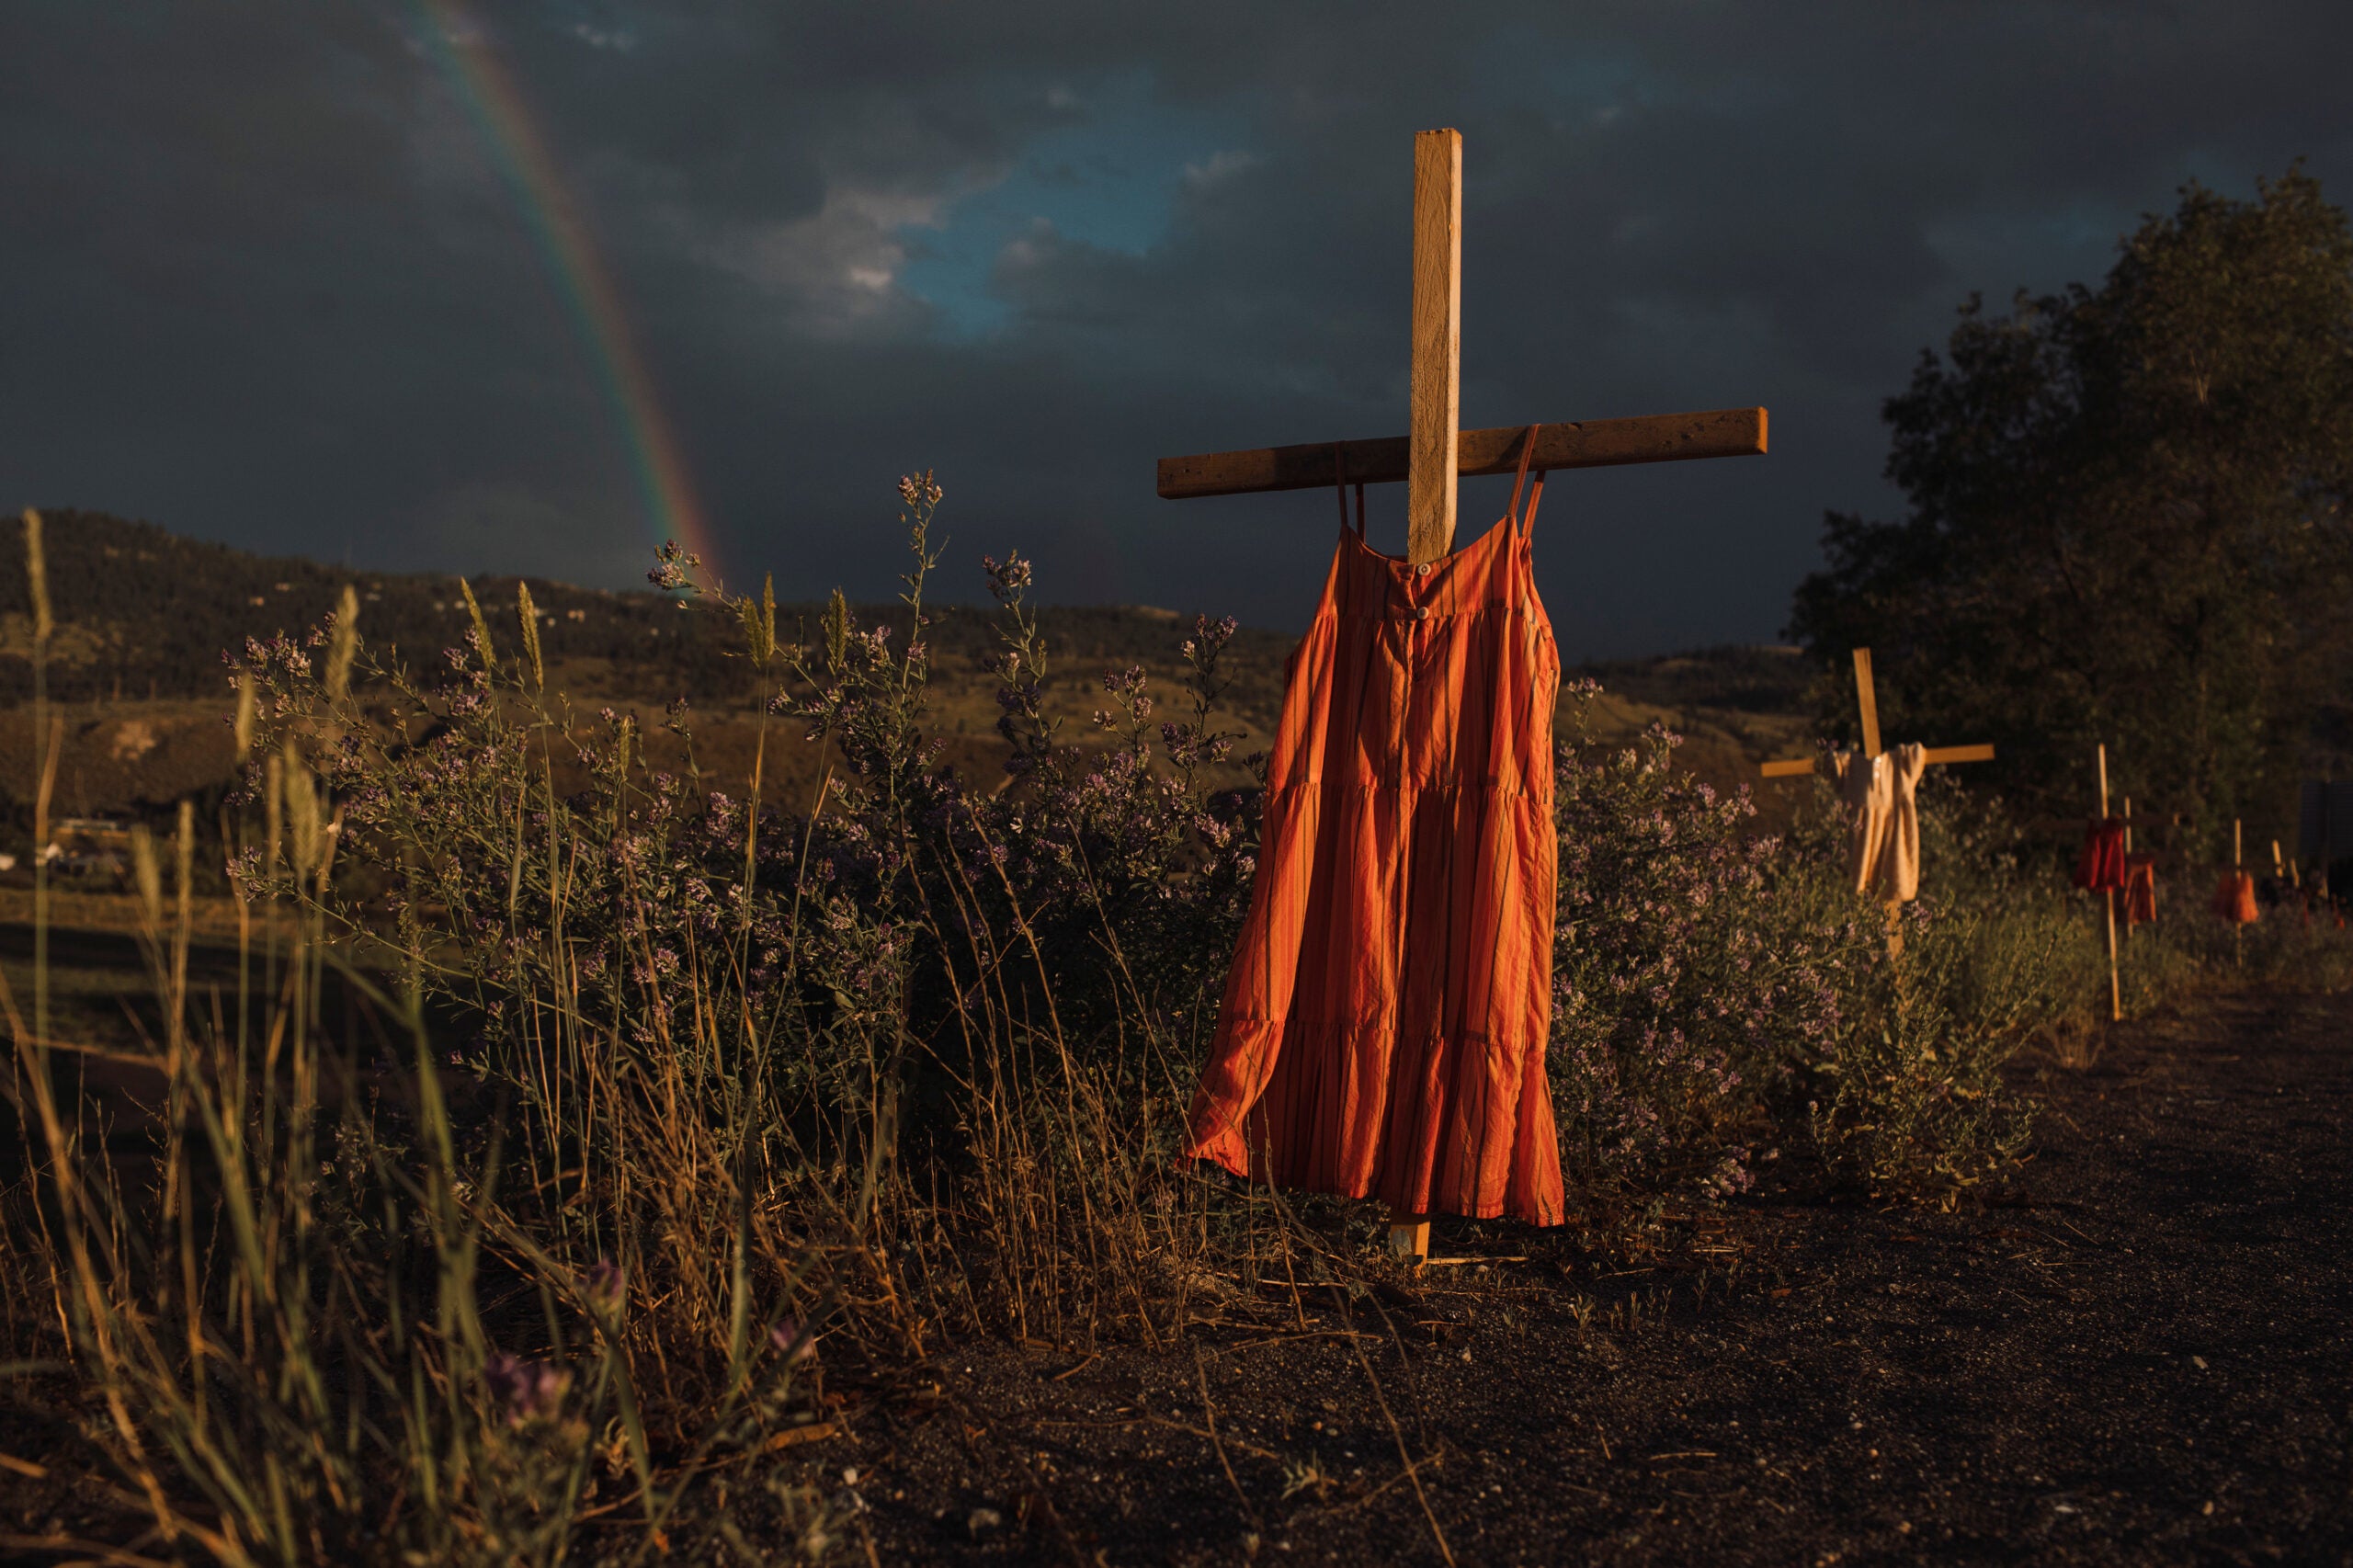 A red dress along the highway signifies the children who died at the Kamloops Indian Residential School in Kamloops, British Columbia on Saturday, June 19, 2021. Red dresses are also used to signify the disproportionate number of missing and murdered Indigenous women and girls.